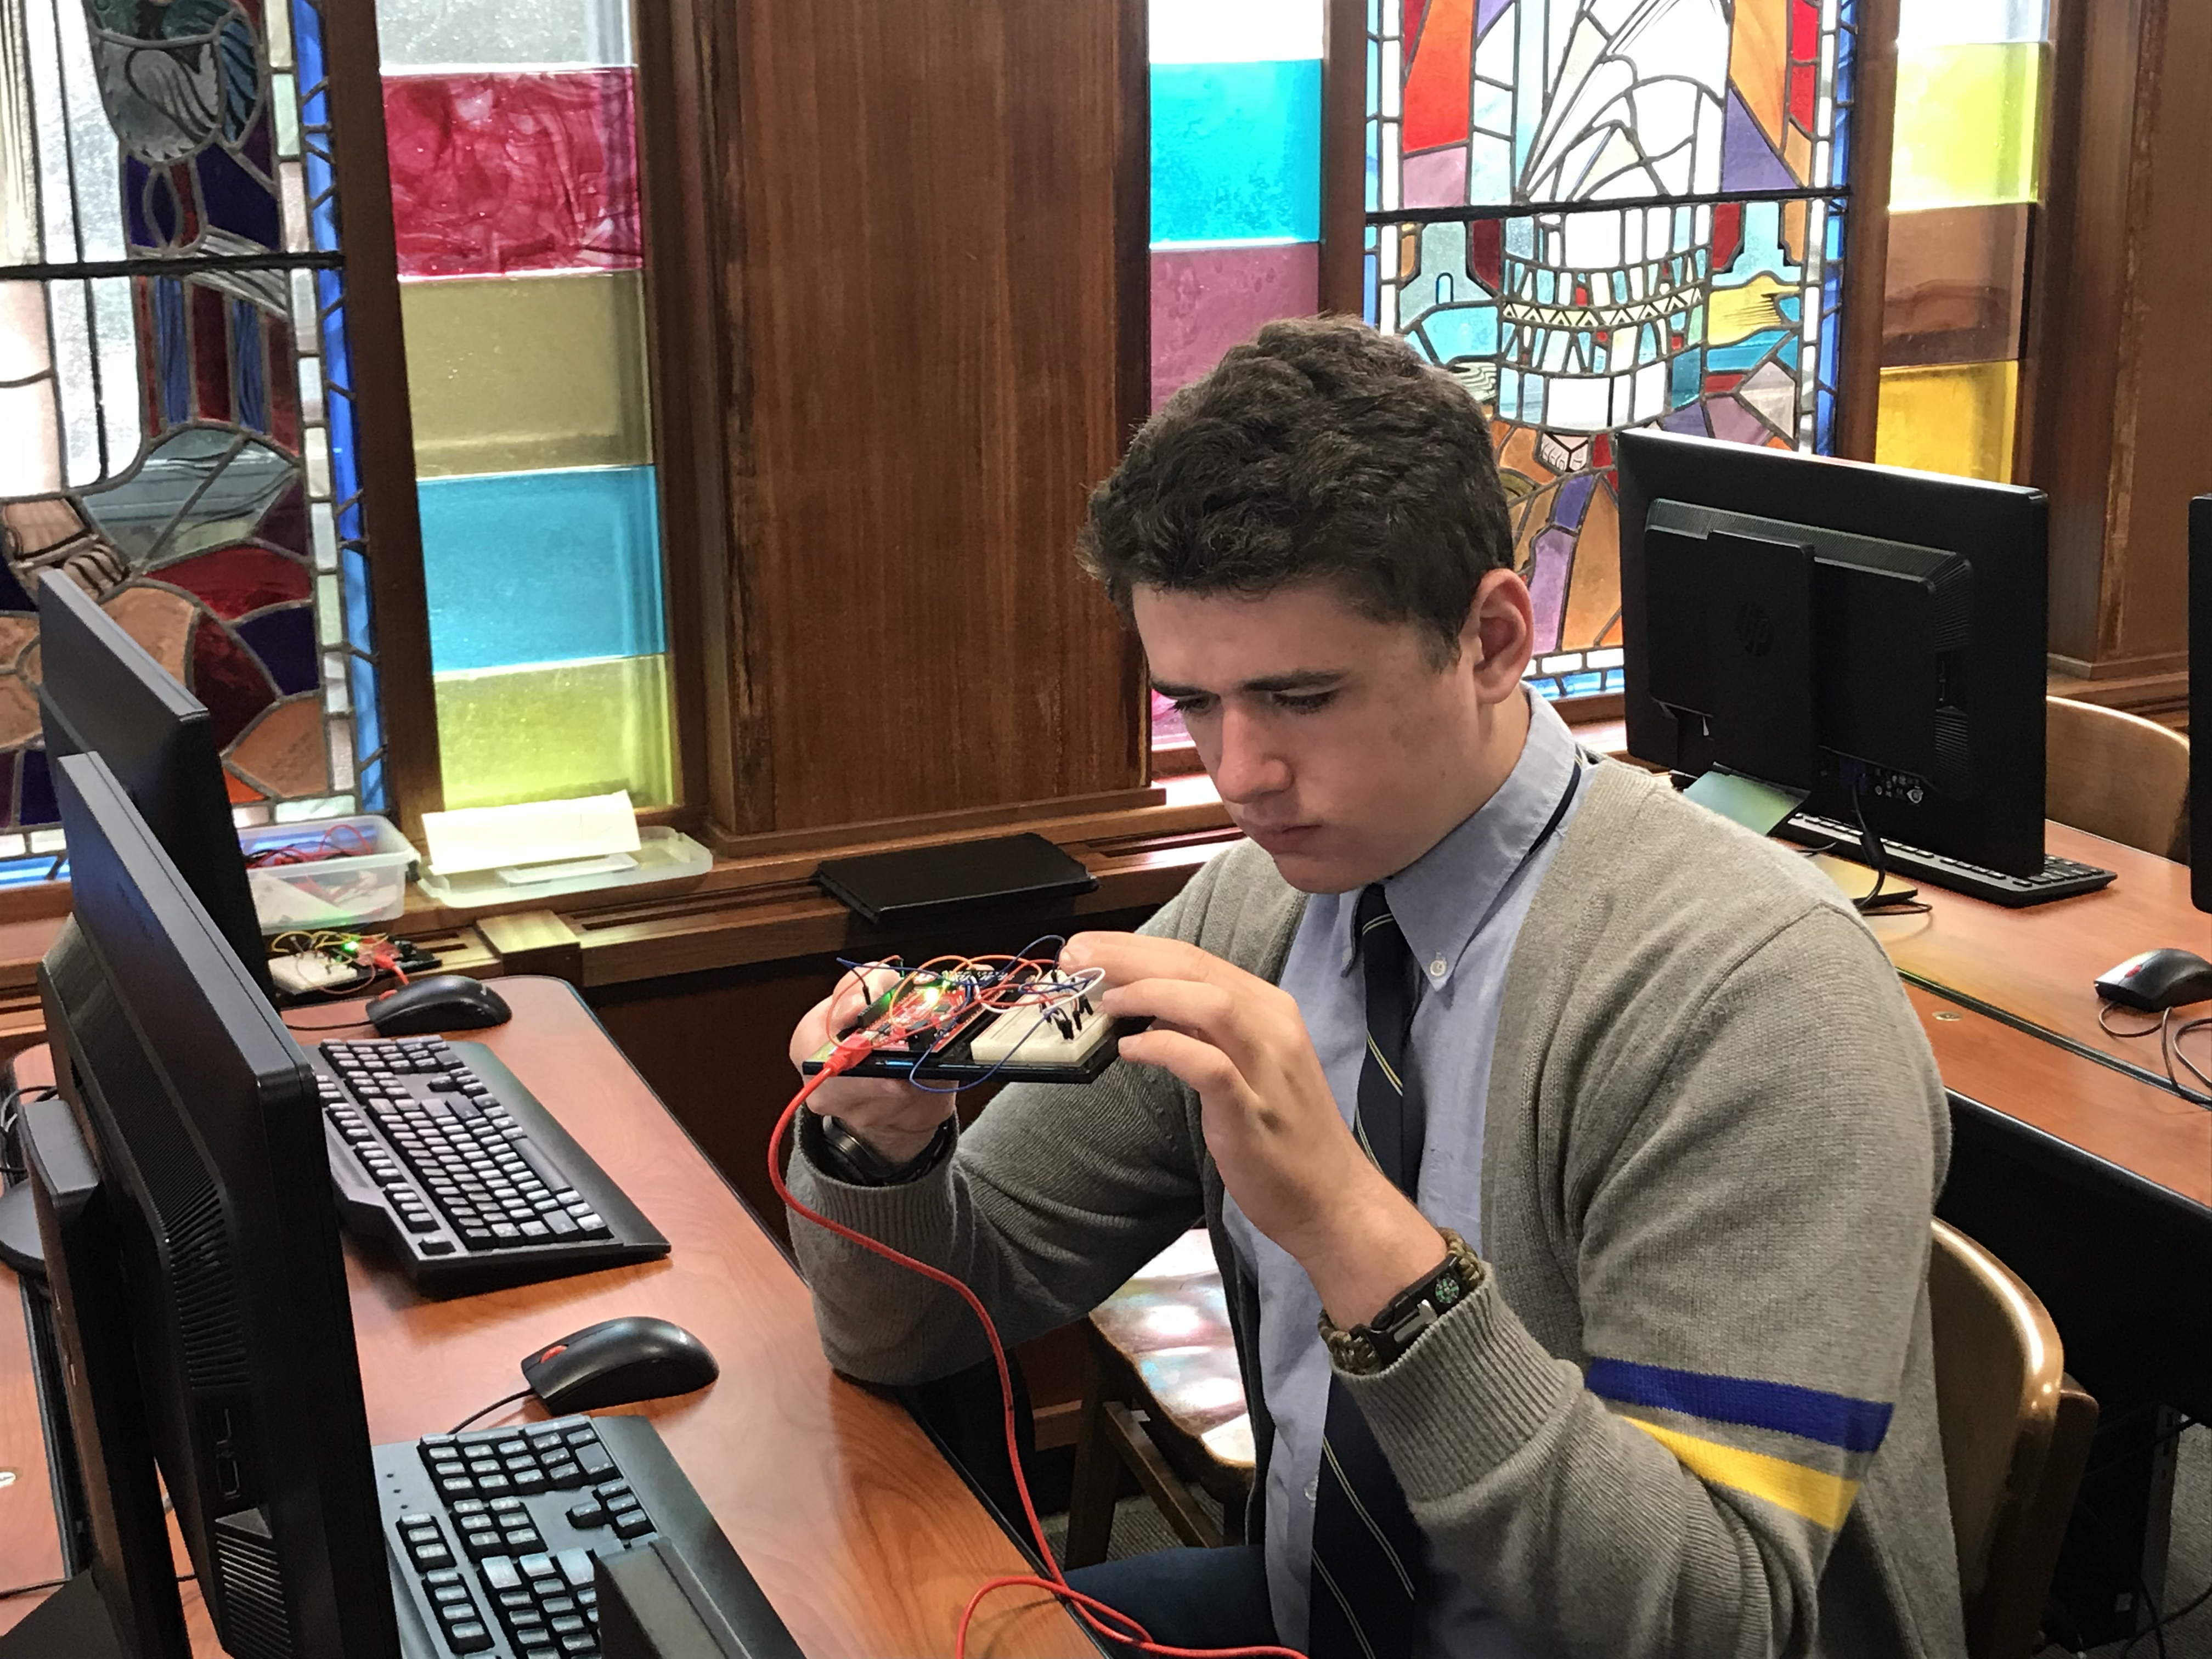 Engineering Students integrating electronics, microprocessors, and coding skills